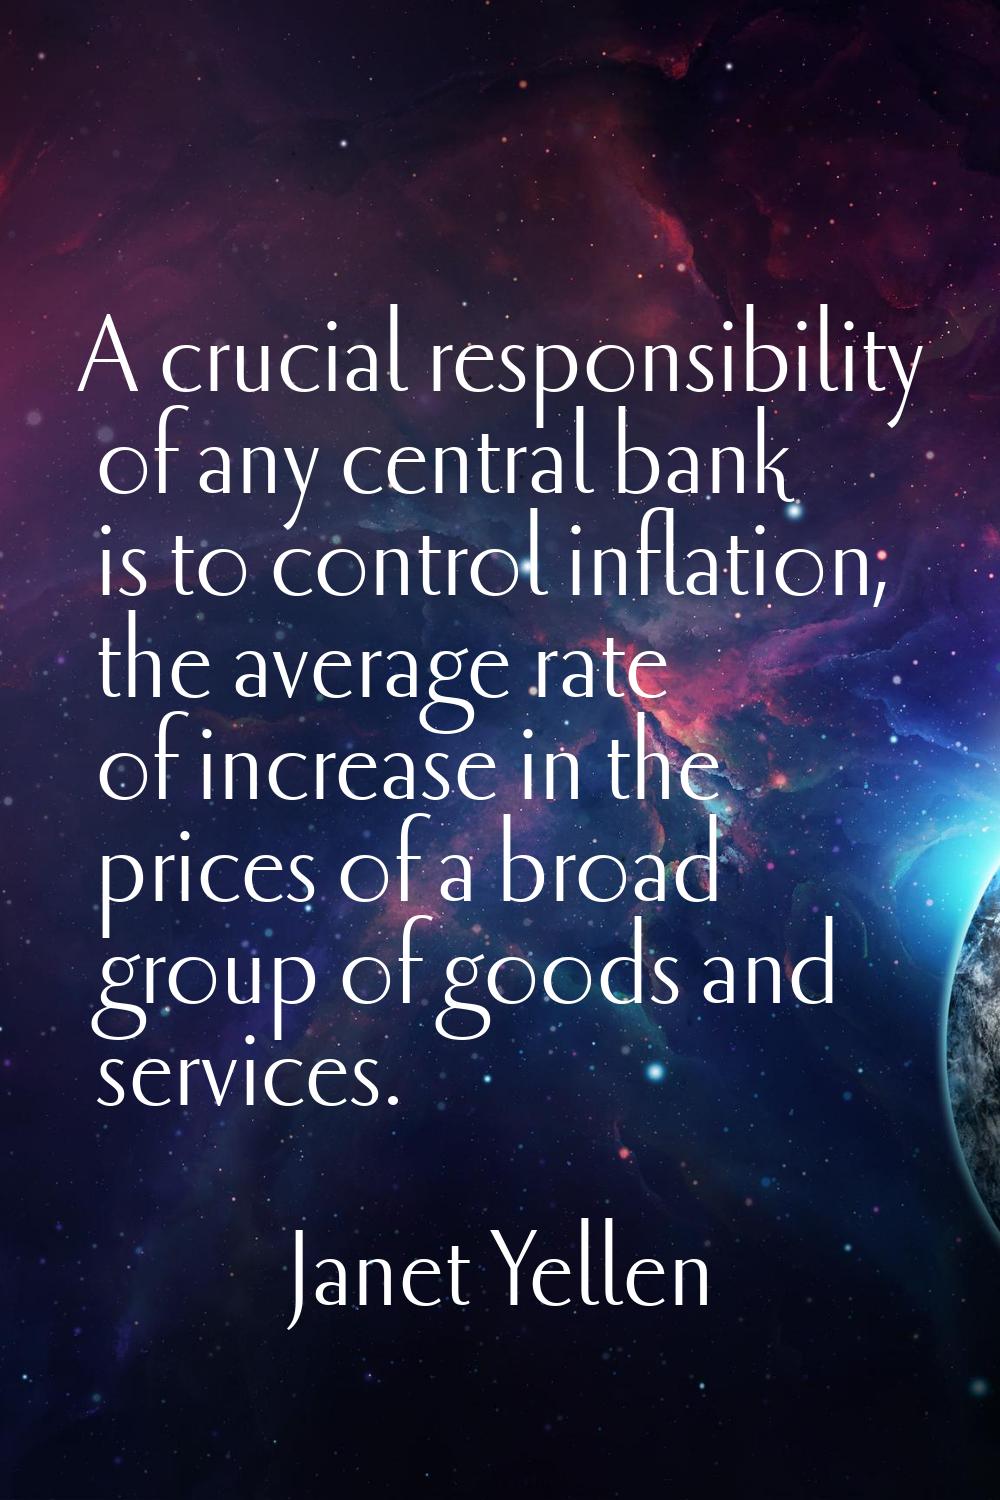 A crucial responsibility of any central bank is to control inflation, the average rate of increase 